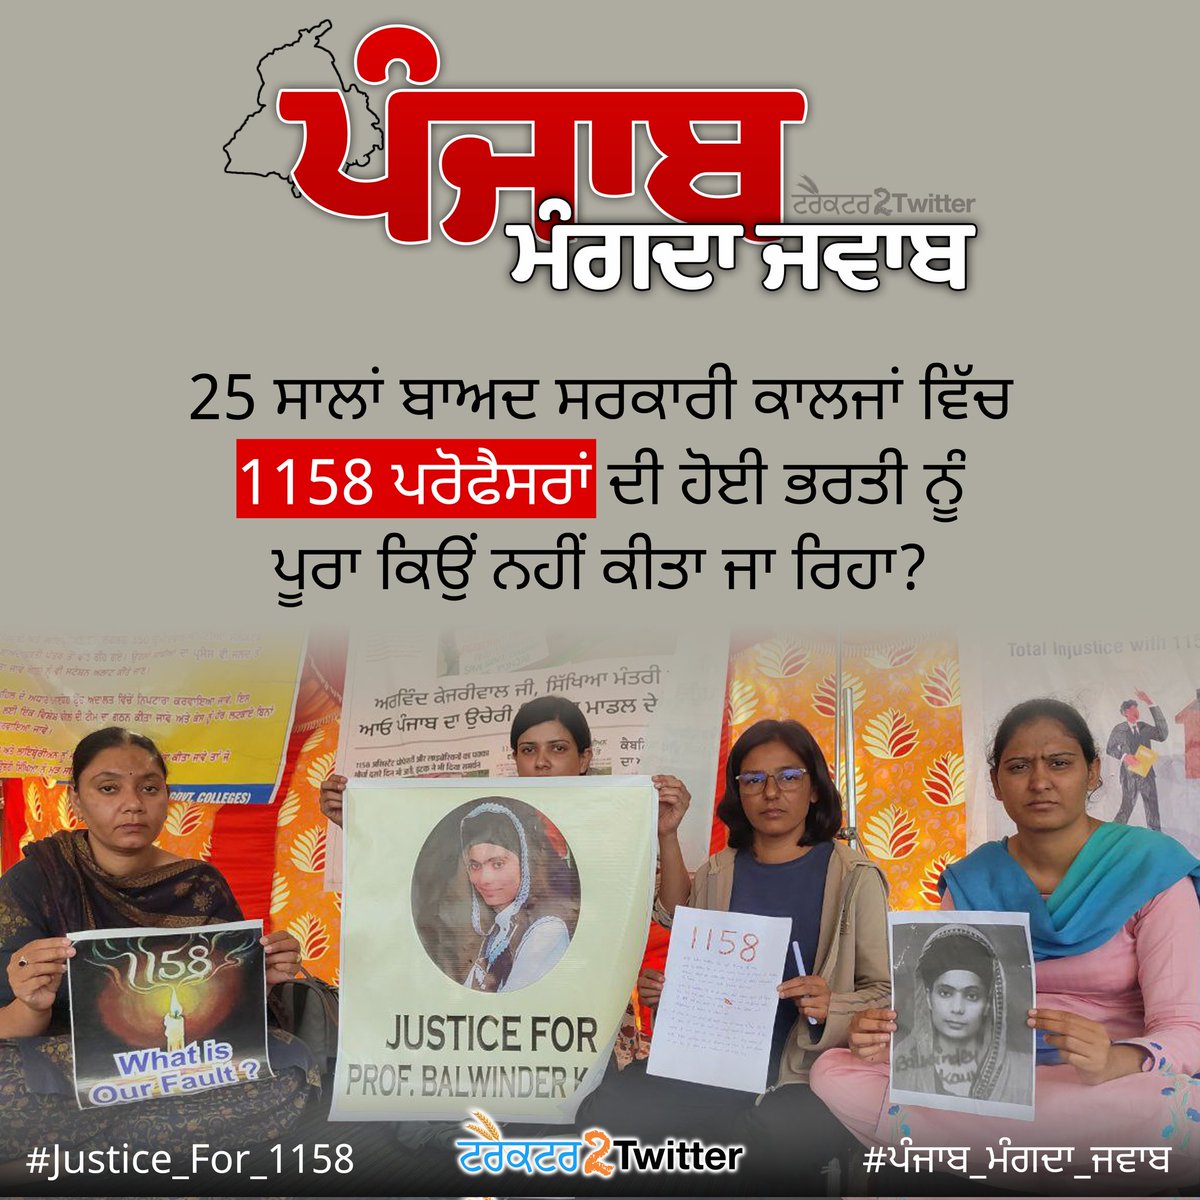 When 1158 selected meritorious candidates will be sent to their work stations? Justice delayed is justice denied. 
#Justice_For_1158 #PakkaDharna_AnandpurSahib #Justice_for_Balwinderkaur